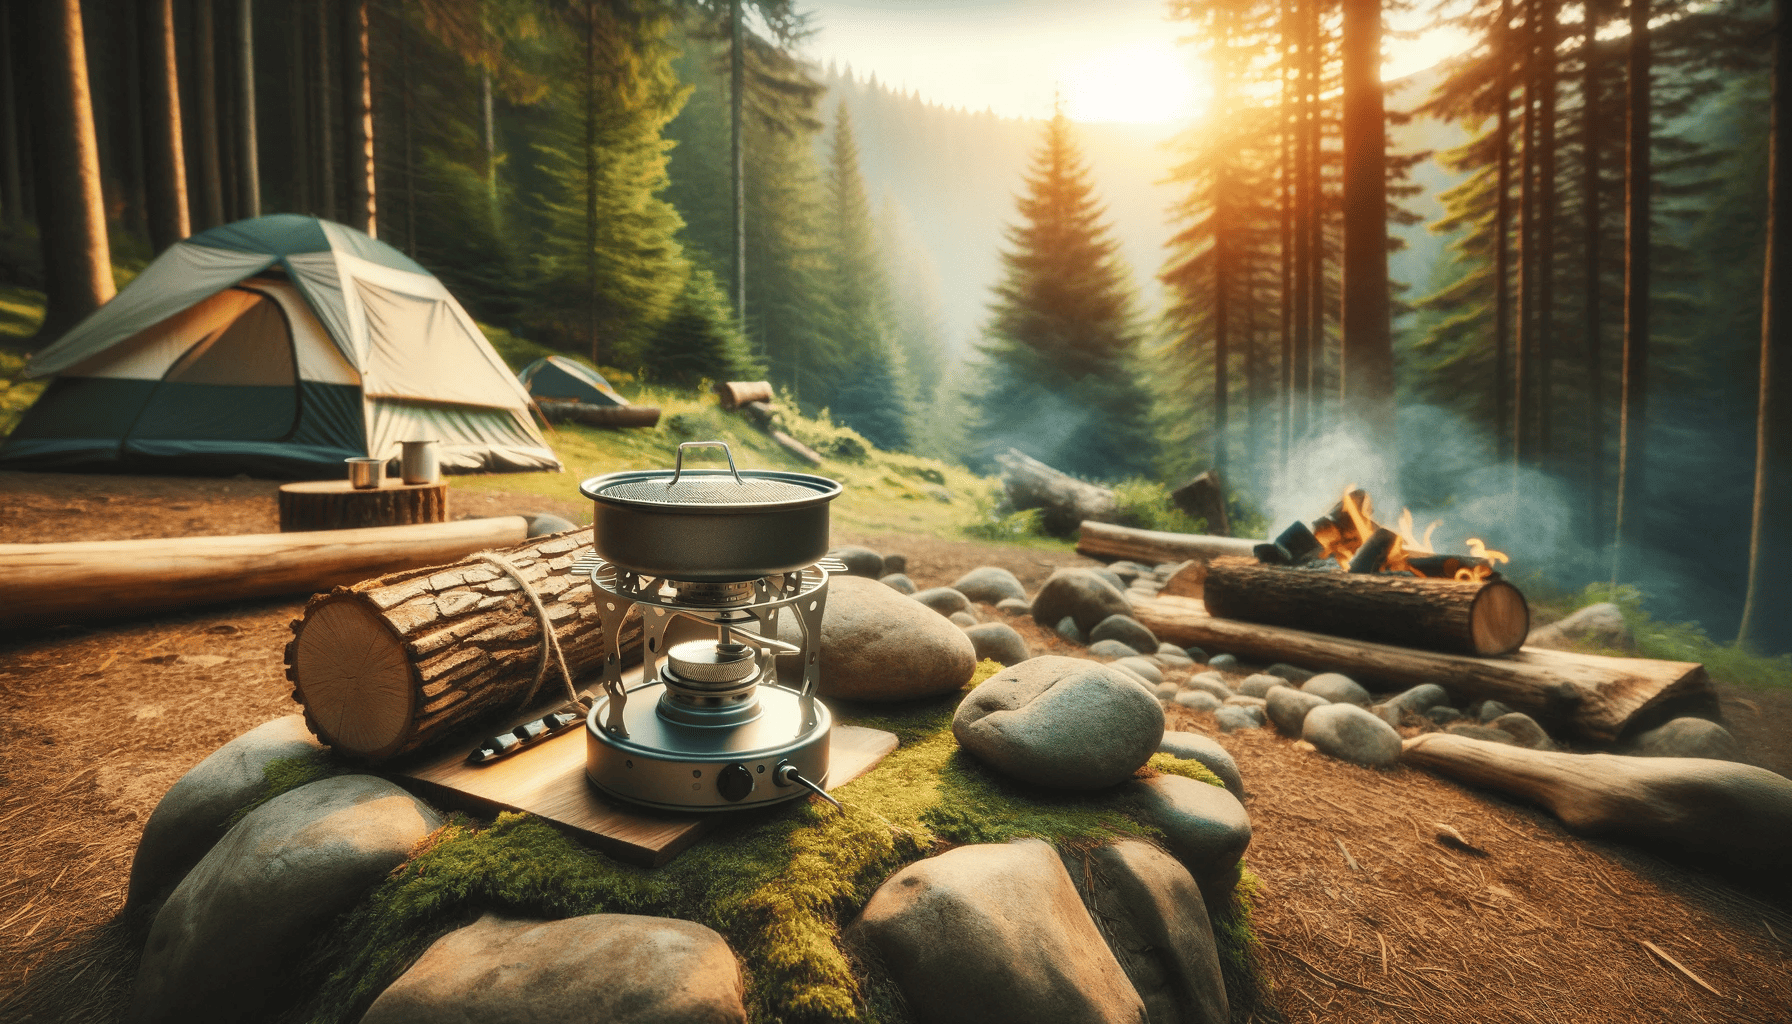 Good Camp Stoves for Hiking